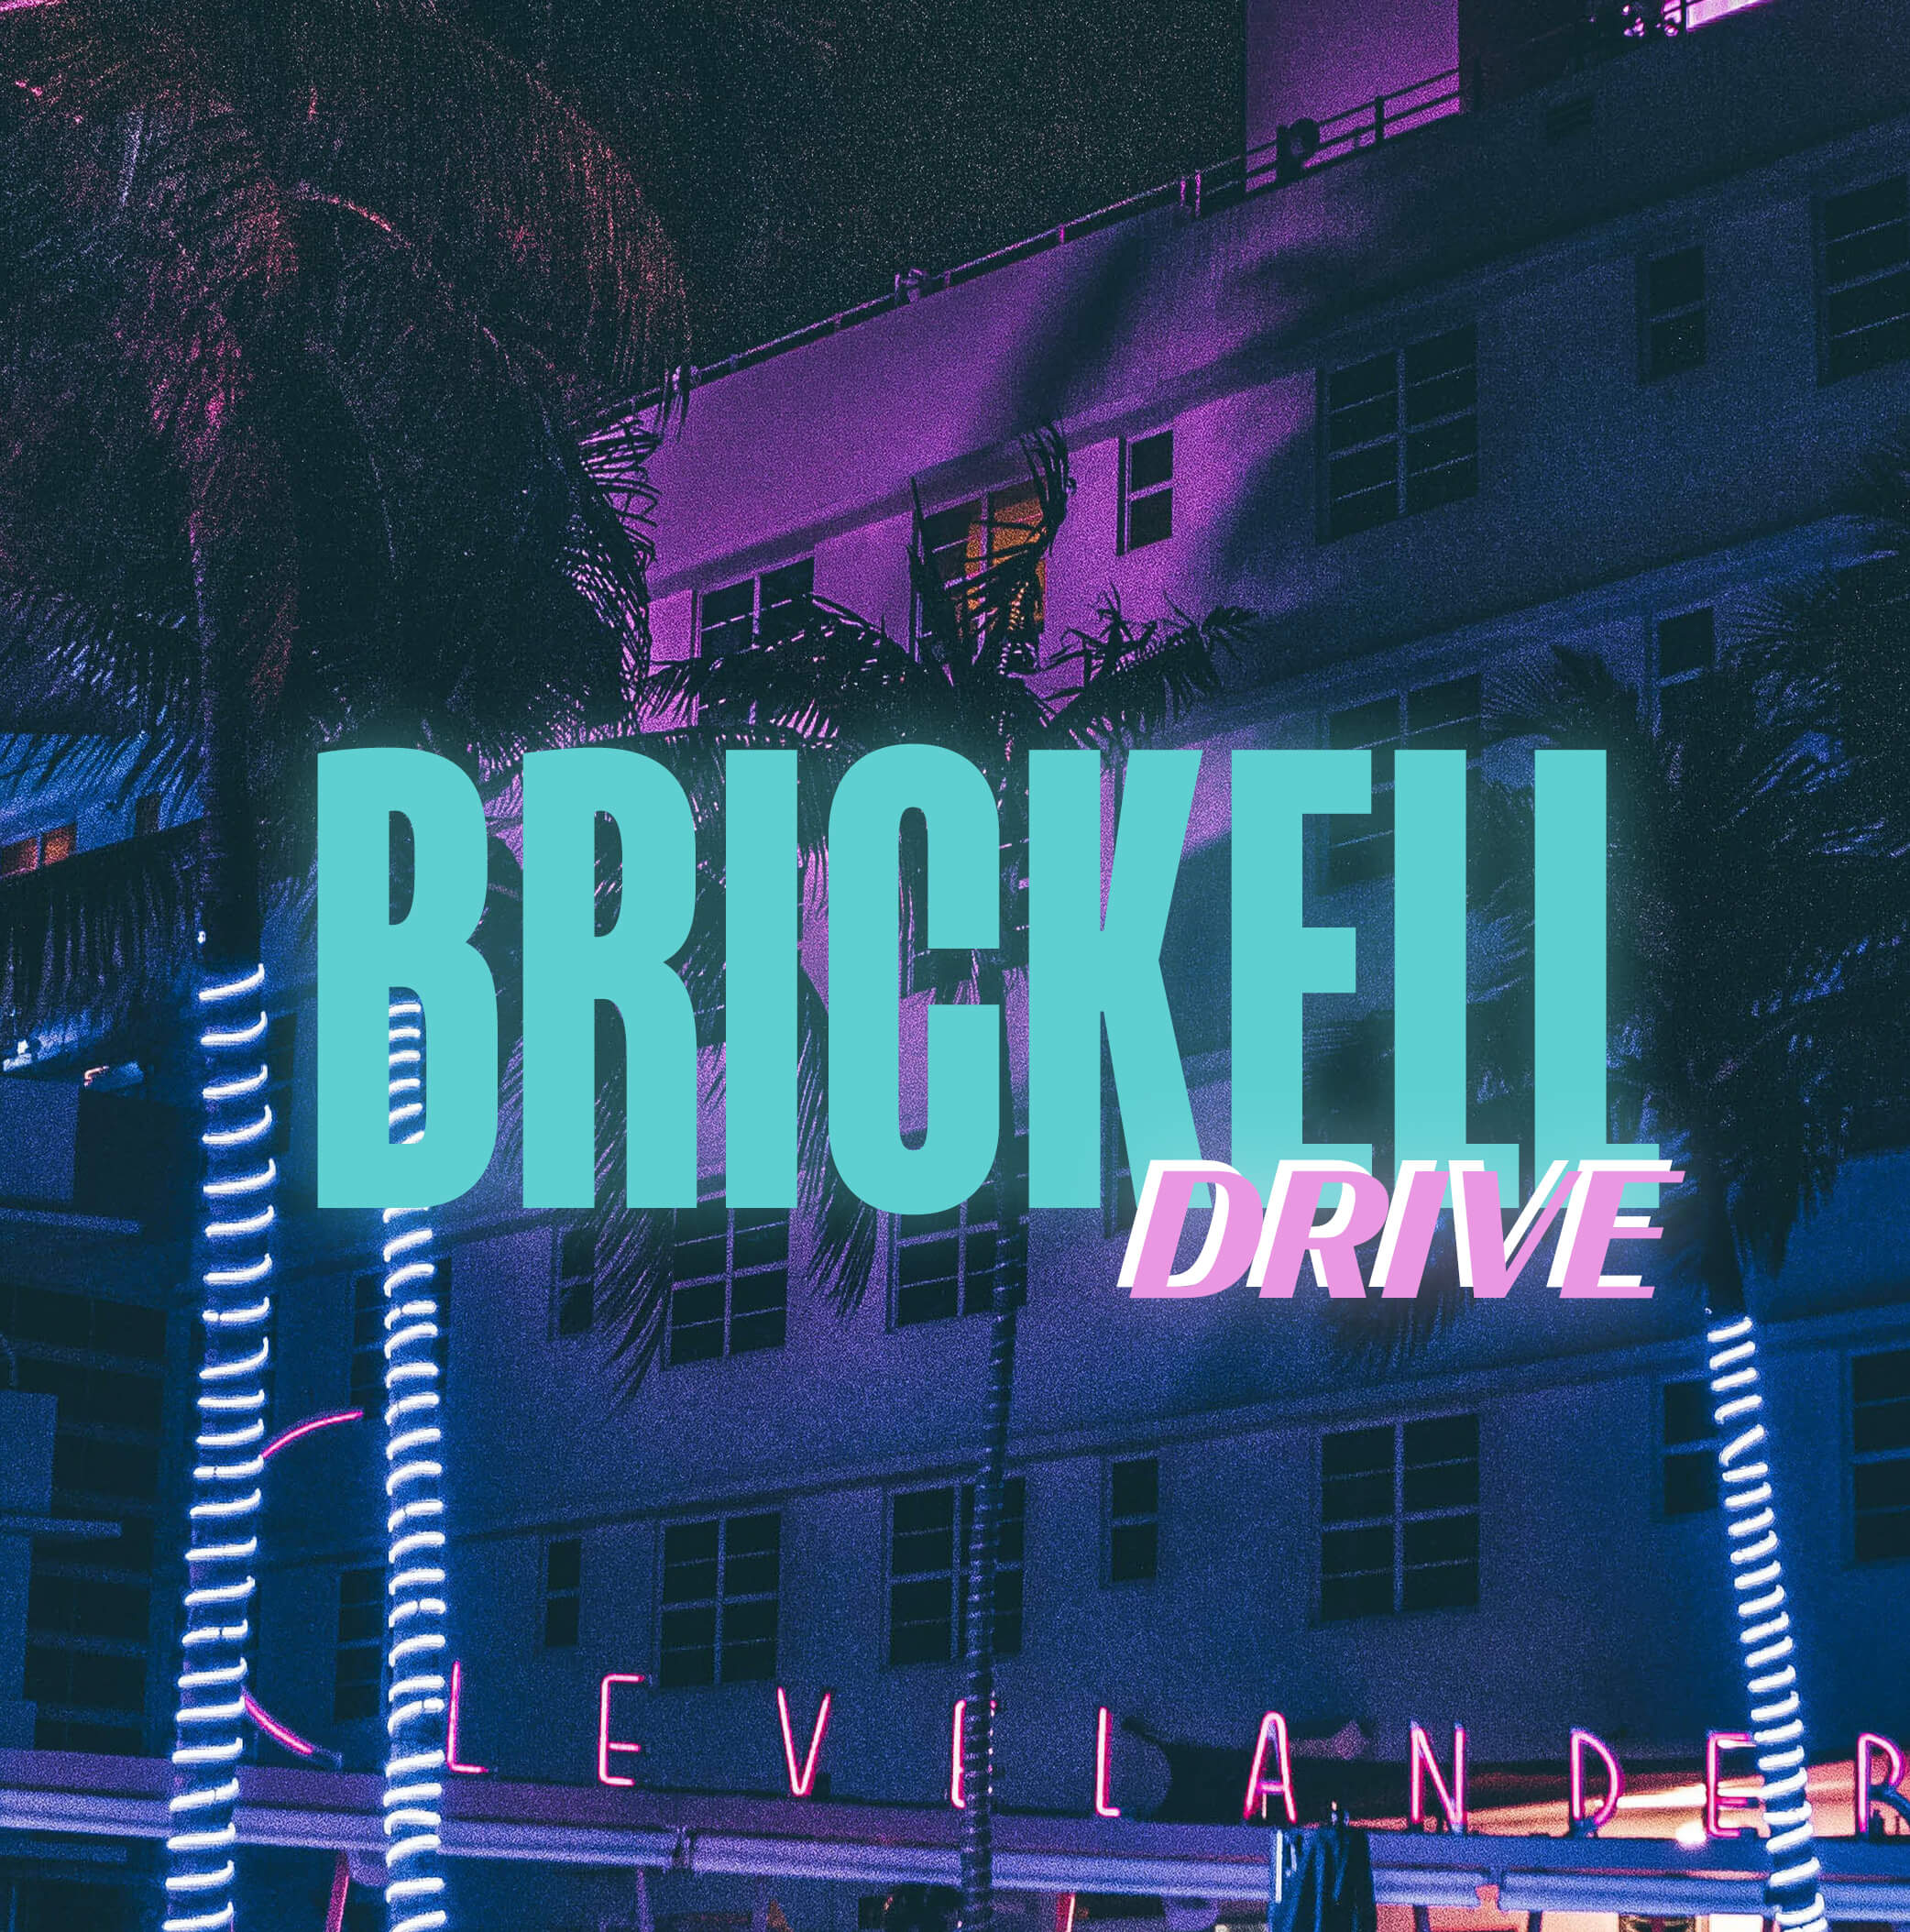 Vince Valholla and Mike Schill are relaunching The CRIB as the first “Playlist Mixshow” titled Brickell Drive